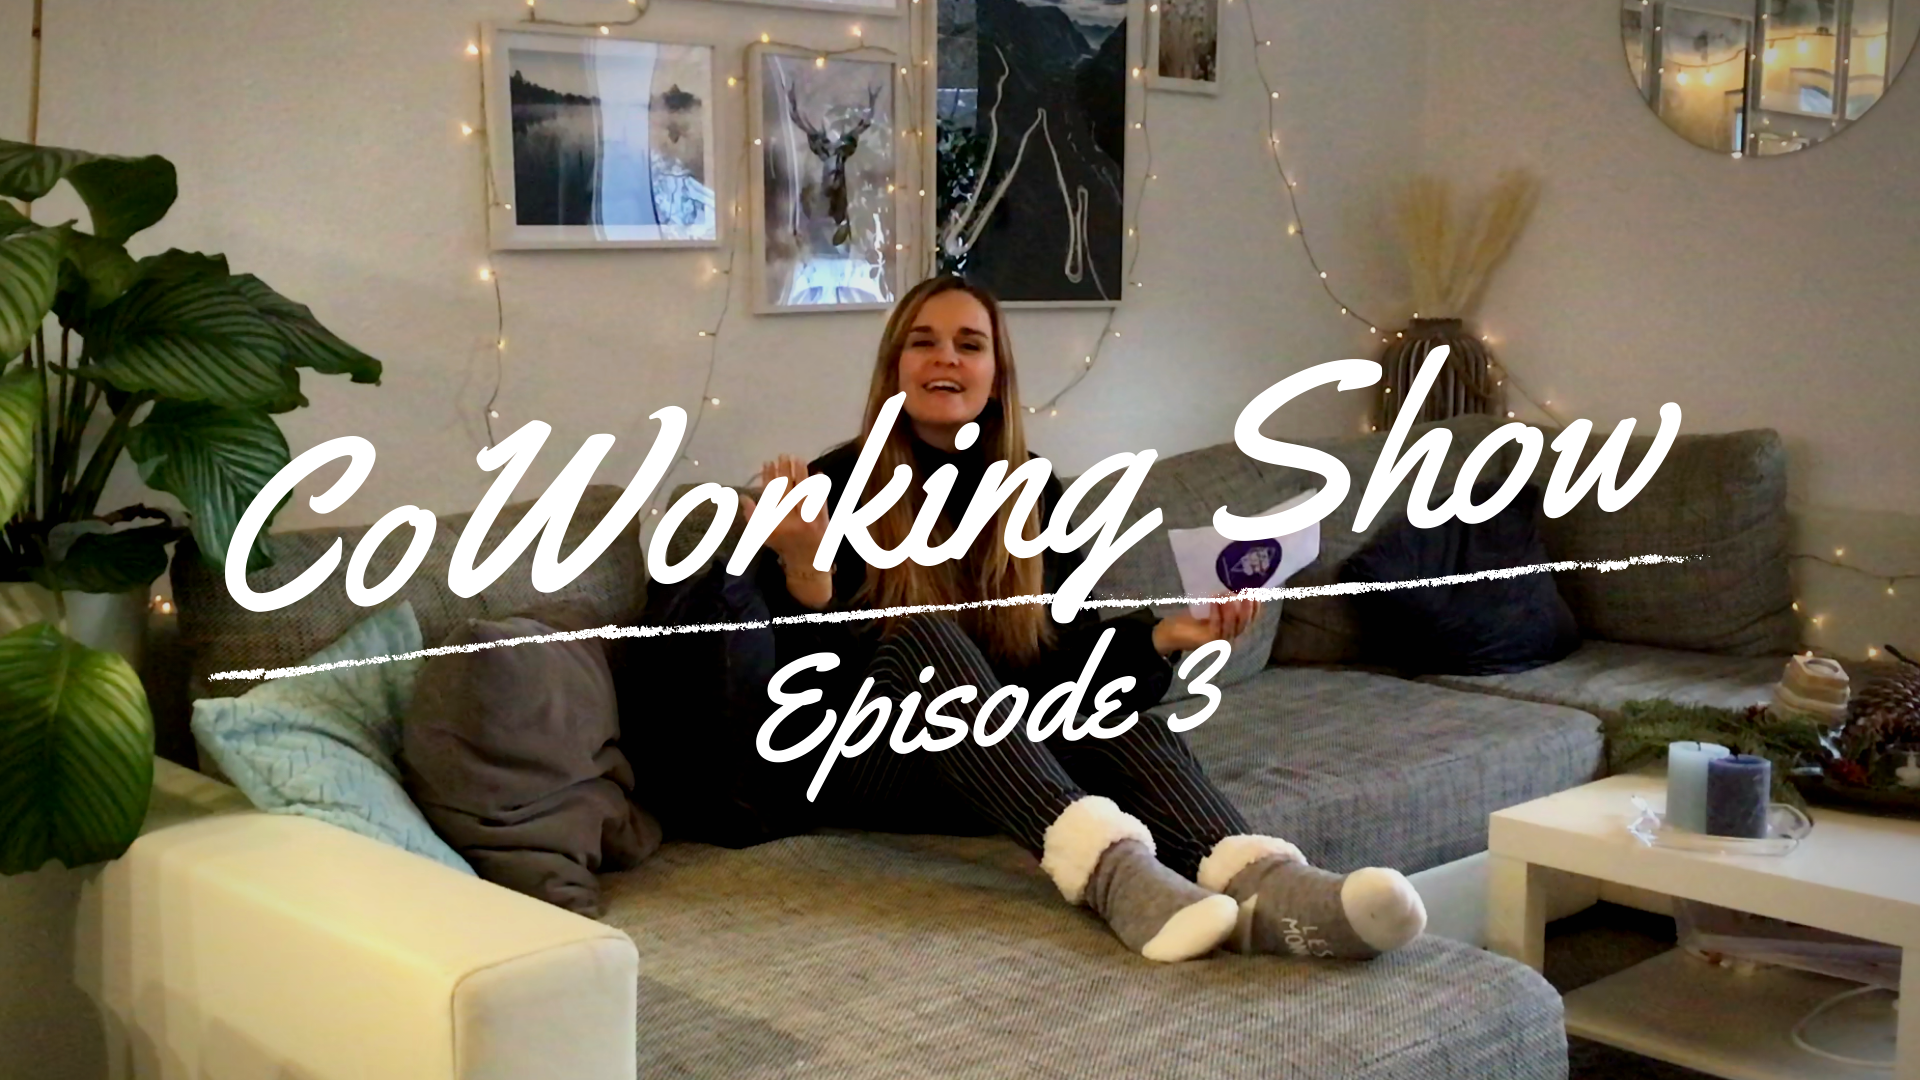 How to Convince Your Boss to let you go on a Remote Work Trip | CoWorking Show